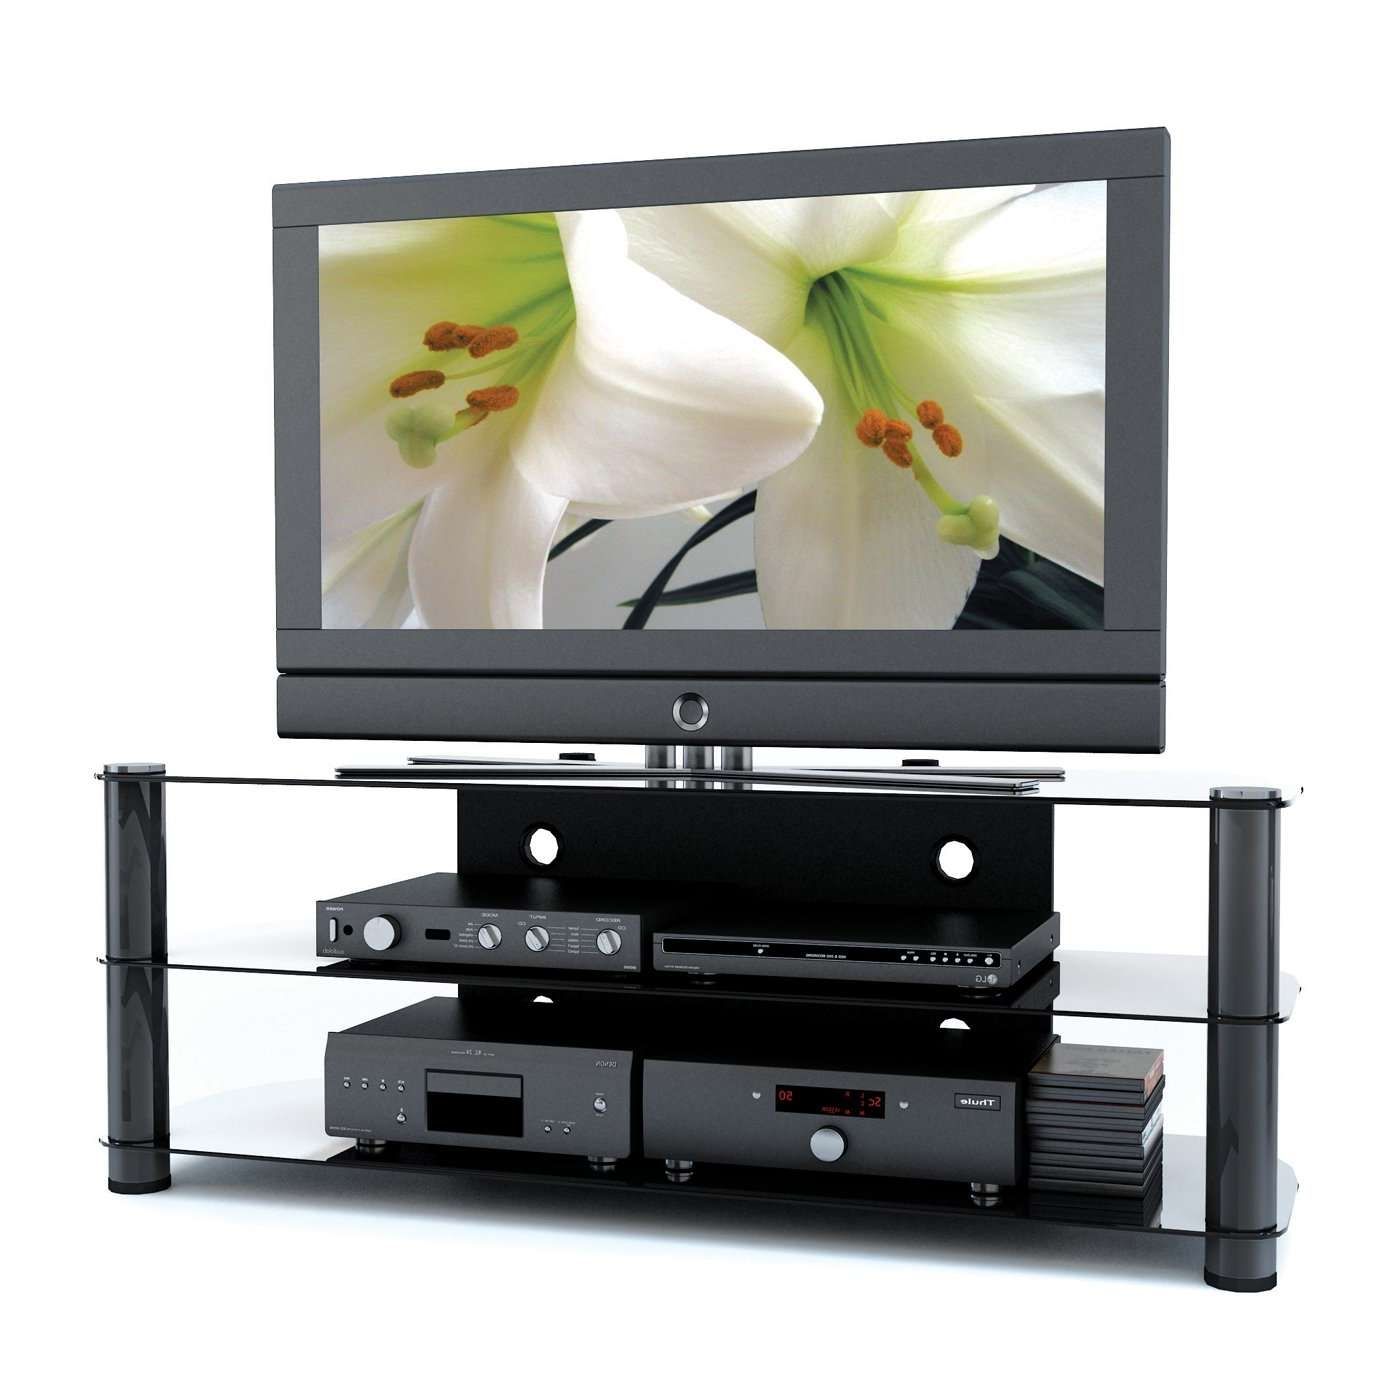 Corliving Ny 9584 New York Metal And Glass Tv Stand | Lowe's Canada Intended For Sonax Tv Stands (View 6 of 15)